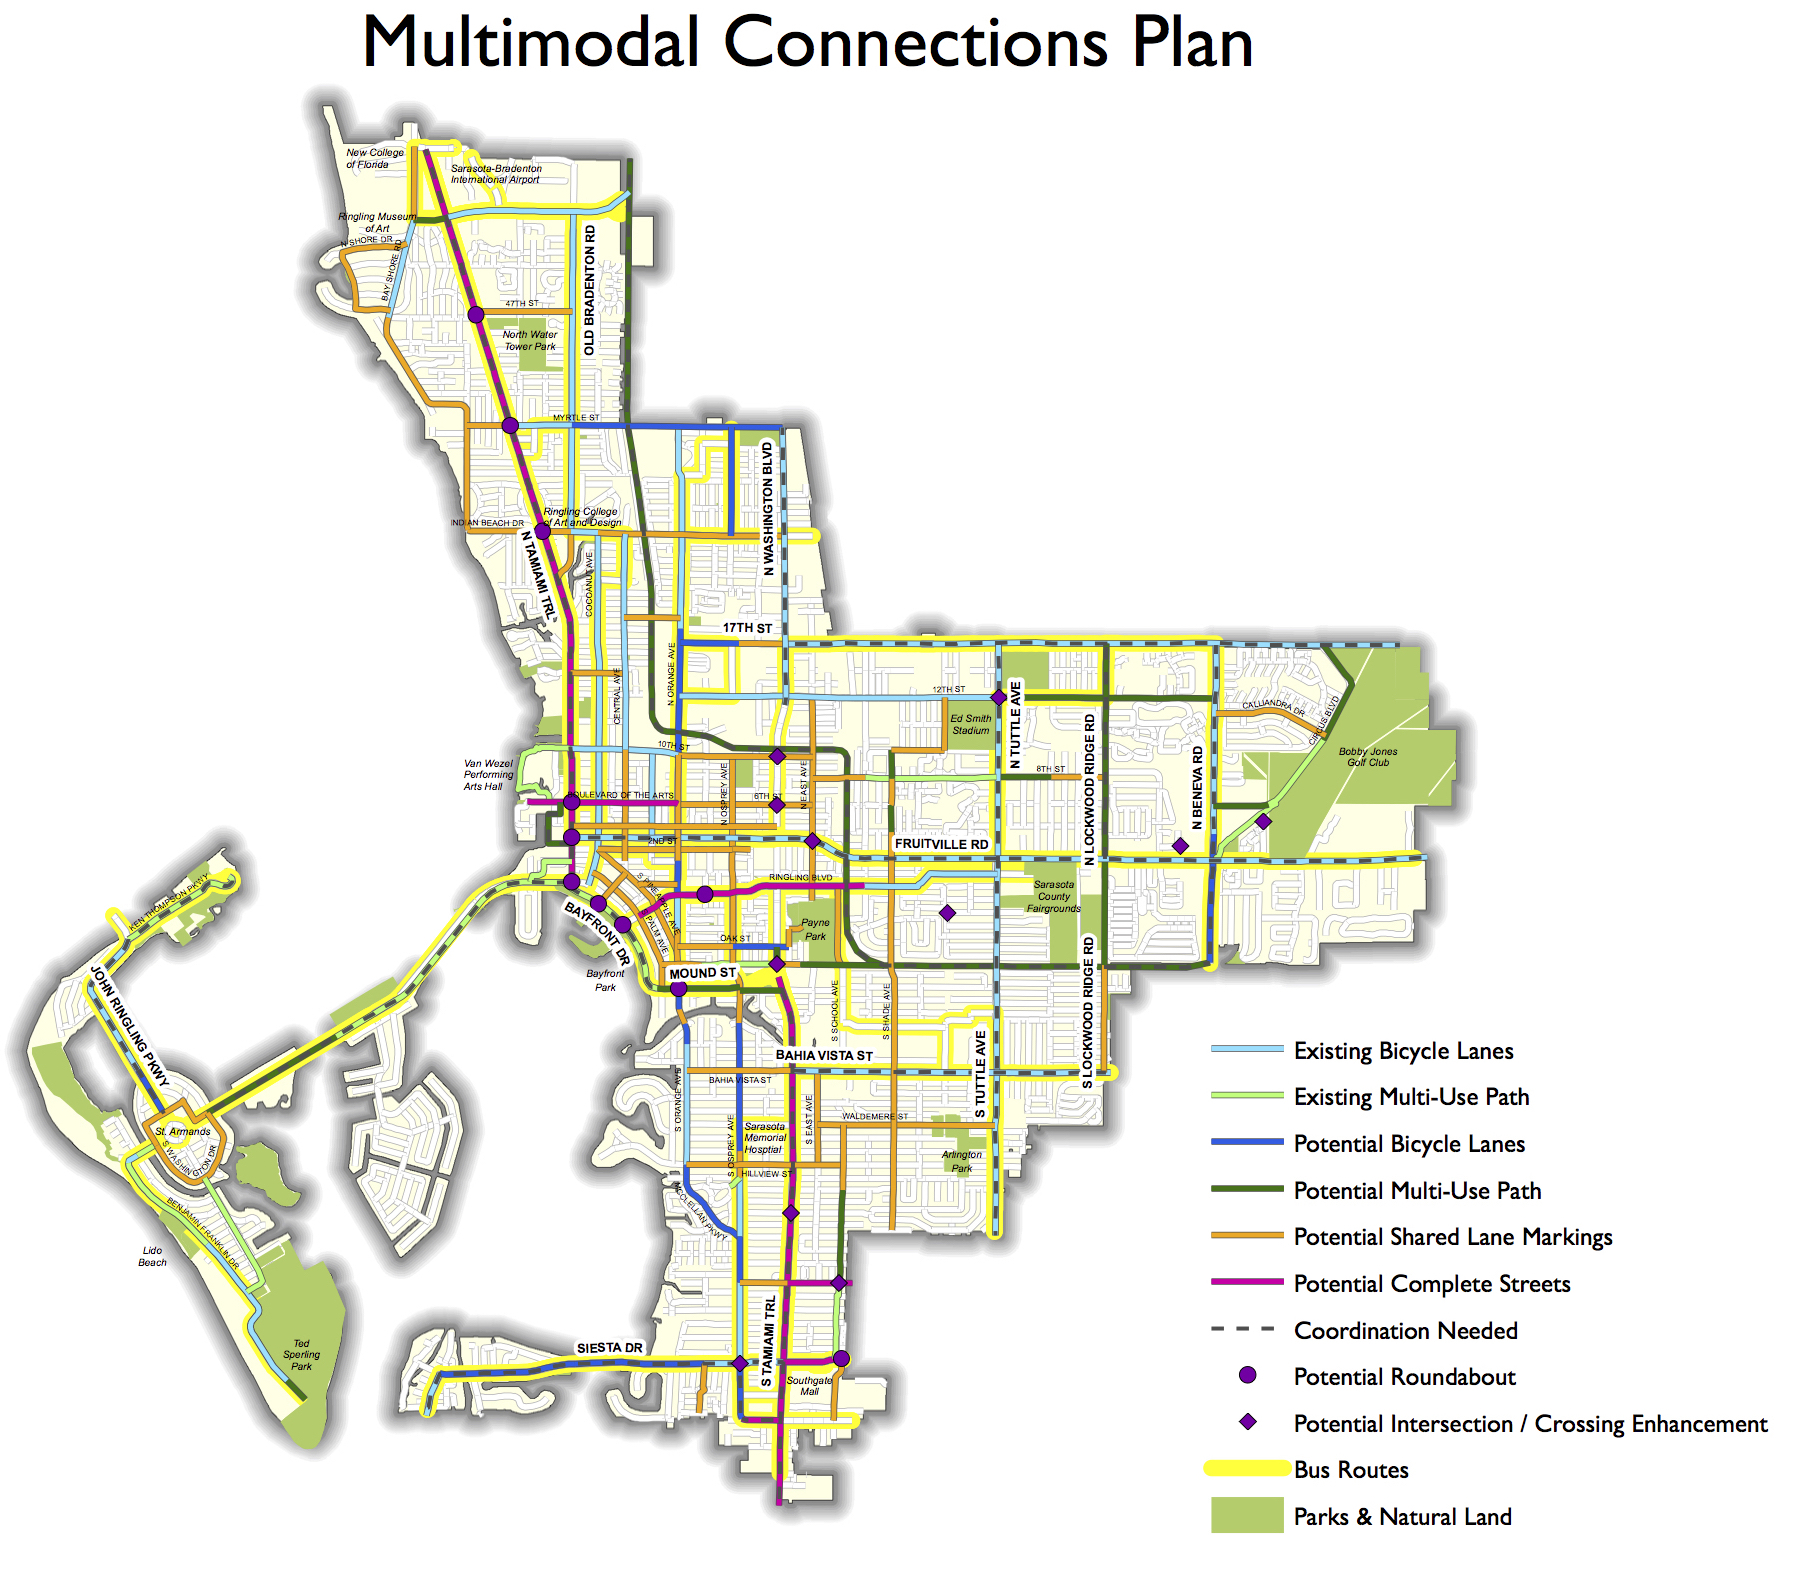 The city's adoption of a multimodal connections plan is designed to assist planning staff members as they seek funding for transportation projects. Image courtesy city of Sarasota.